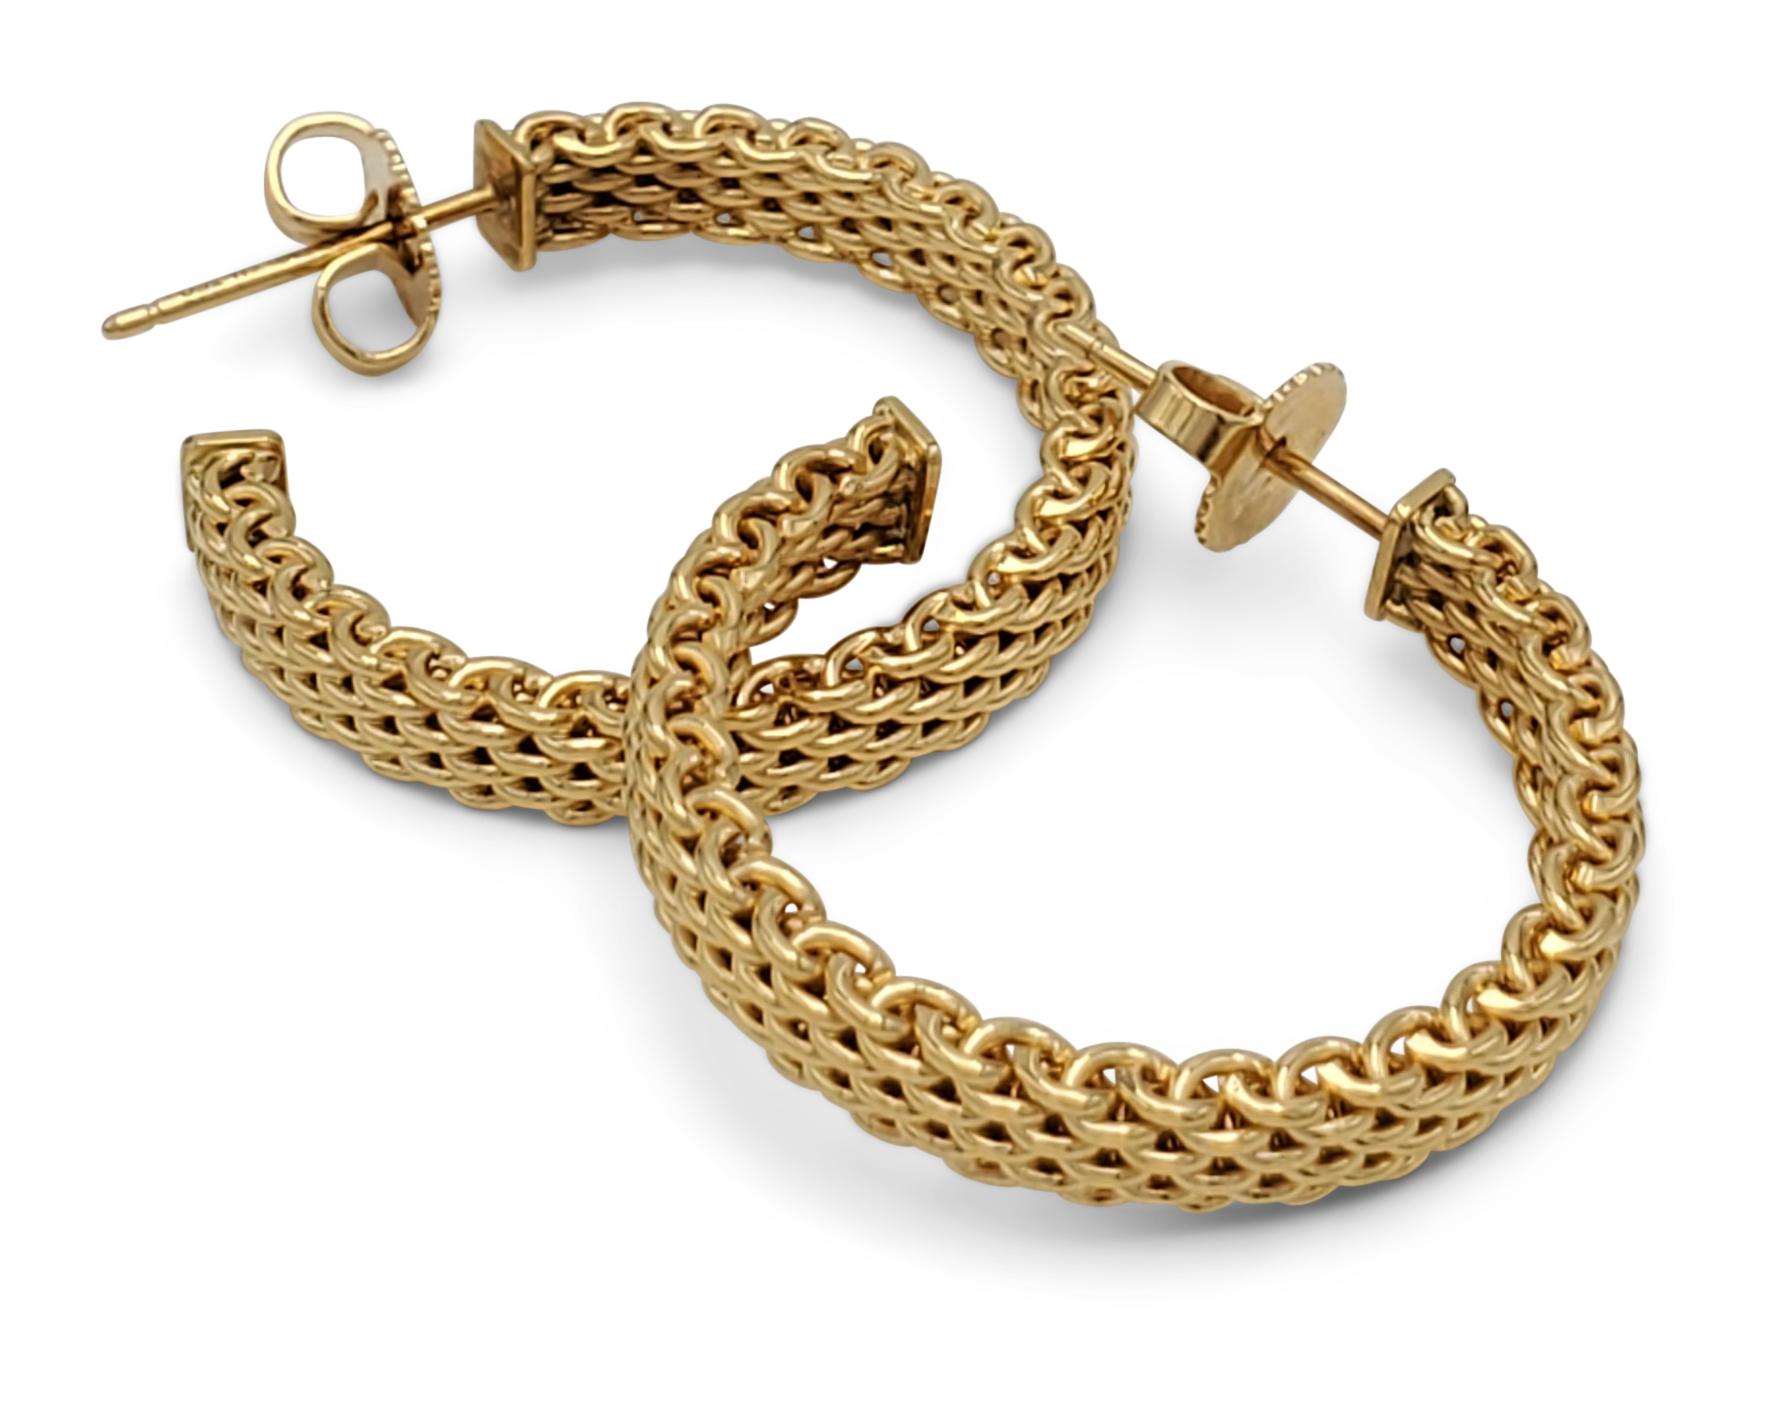 Authentic Tiffany & Co. 'Somerset' mesh hoops crafted in 18 karat yellow gold. Signed T&Co., Au750. The earrings measure 25mm in diameter. Presented with original pouch and box, no papers. CIRCA 2010s. 